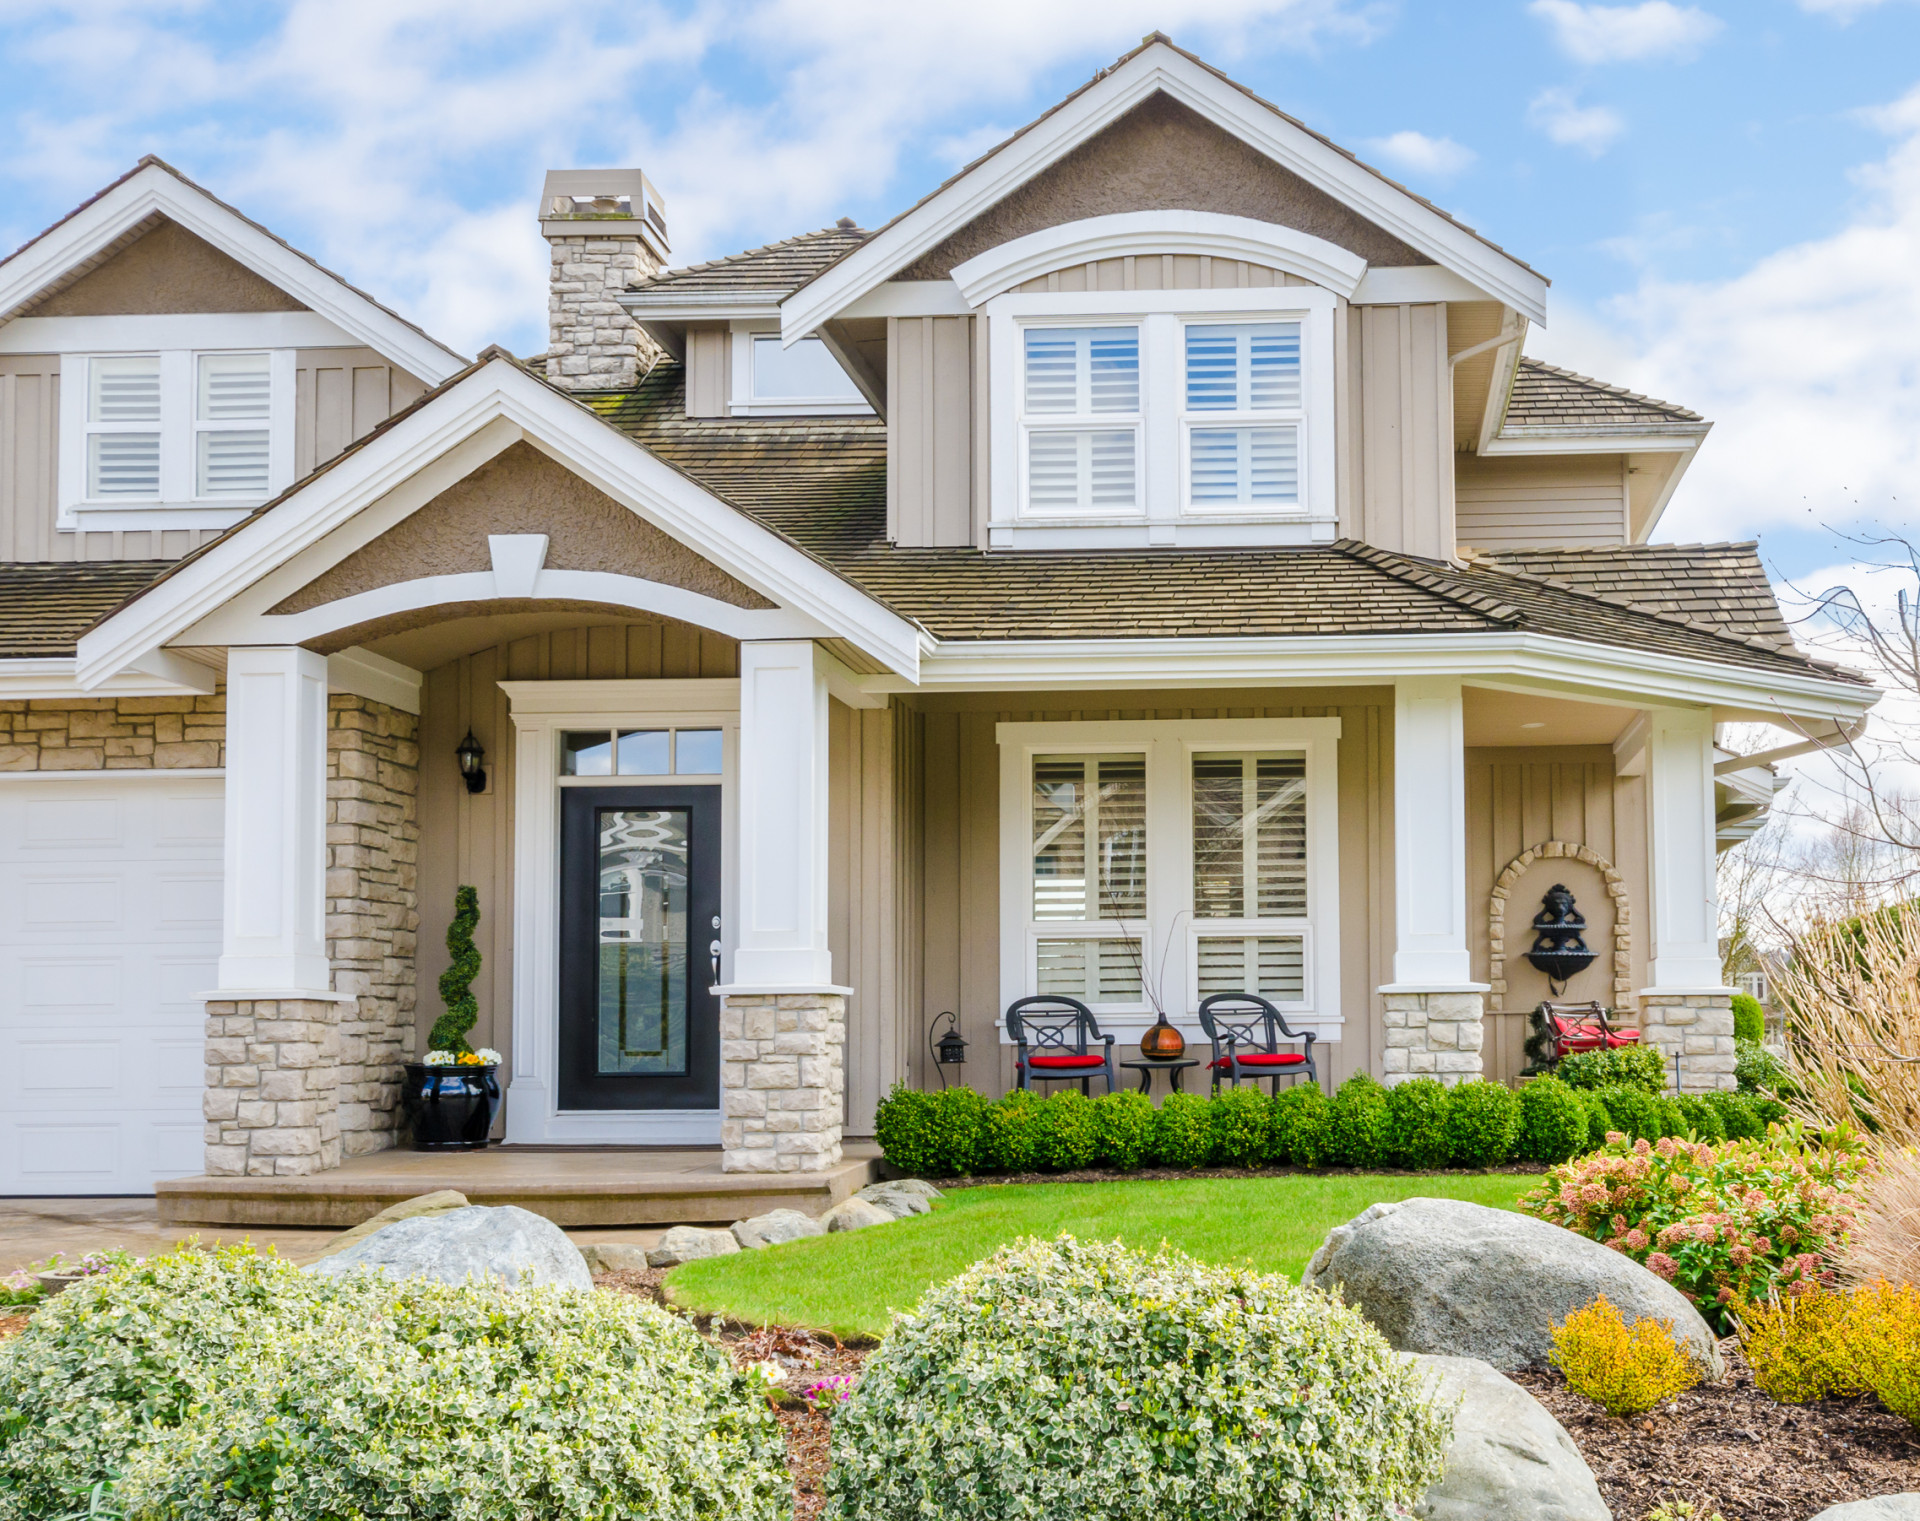 3 Signs That You Should Not Refinance Your Home